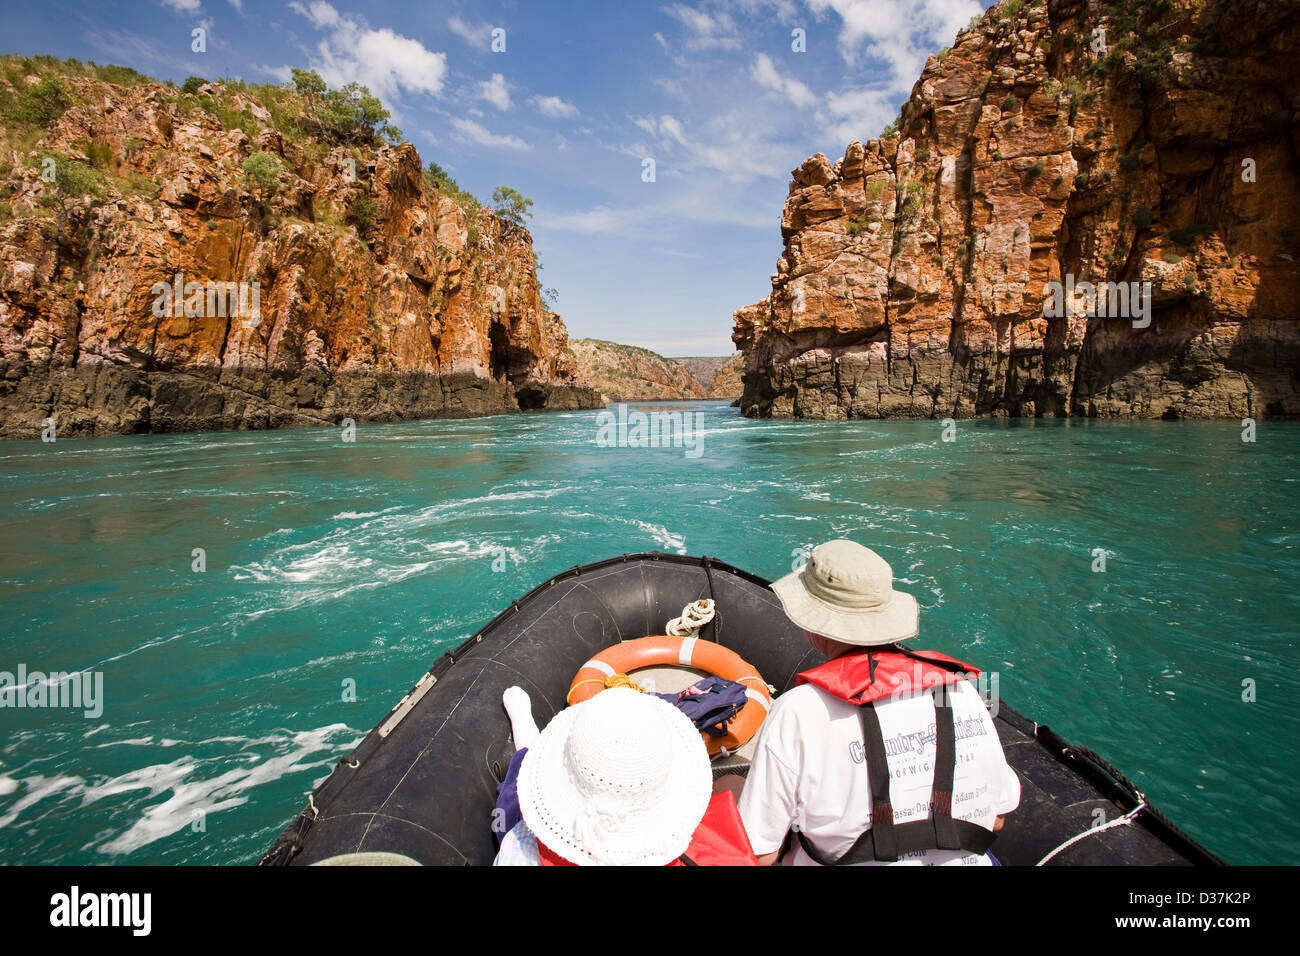 Zodiacs from the Aussie expedition cruiser Orion approach the famous Horizontal Waterfalls of Talbot Bay, Kimberley region, Aust Stock Photo